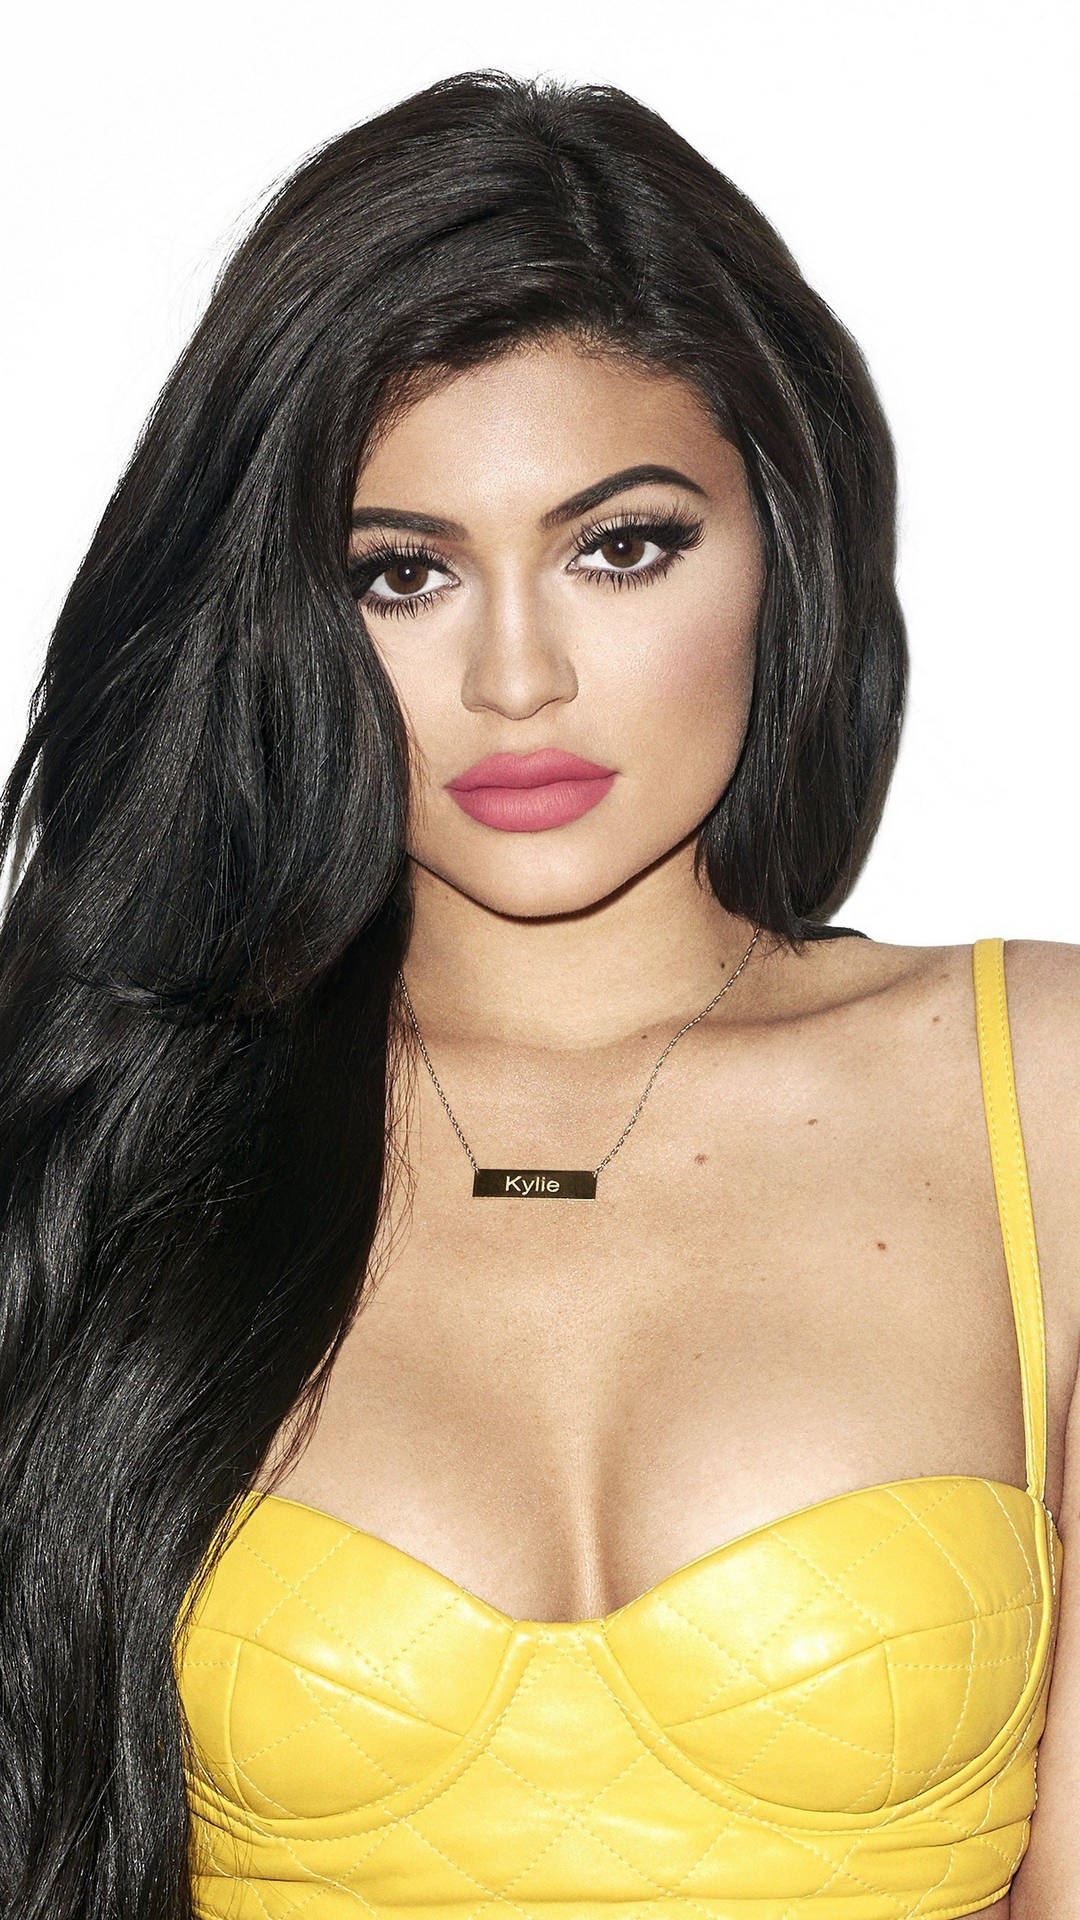 Kylie Jenner In Yellow Brassiere Background